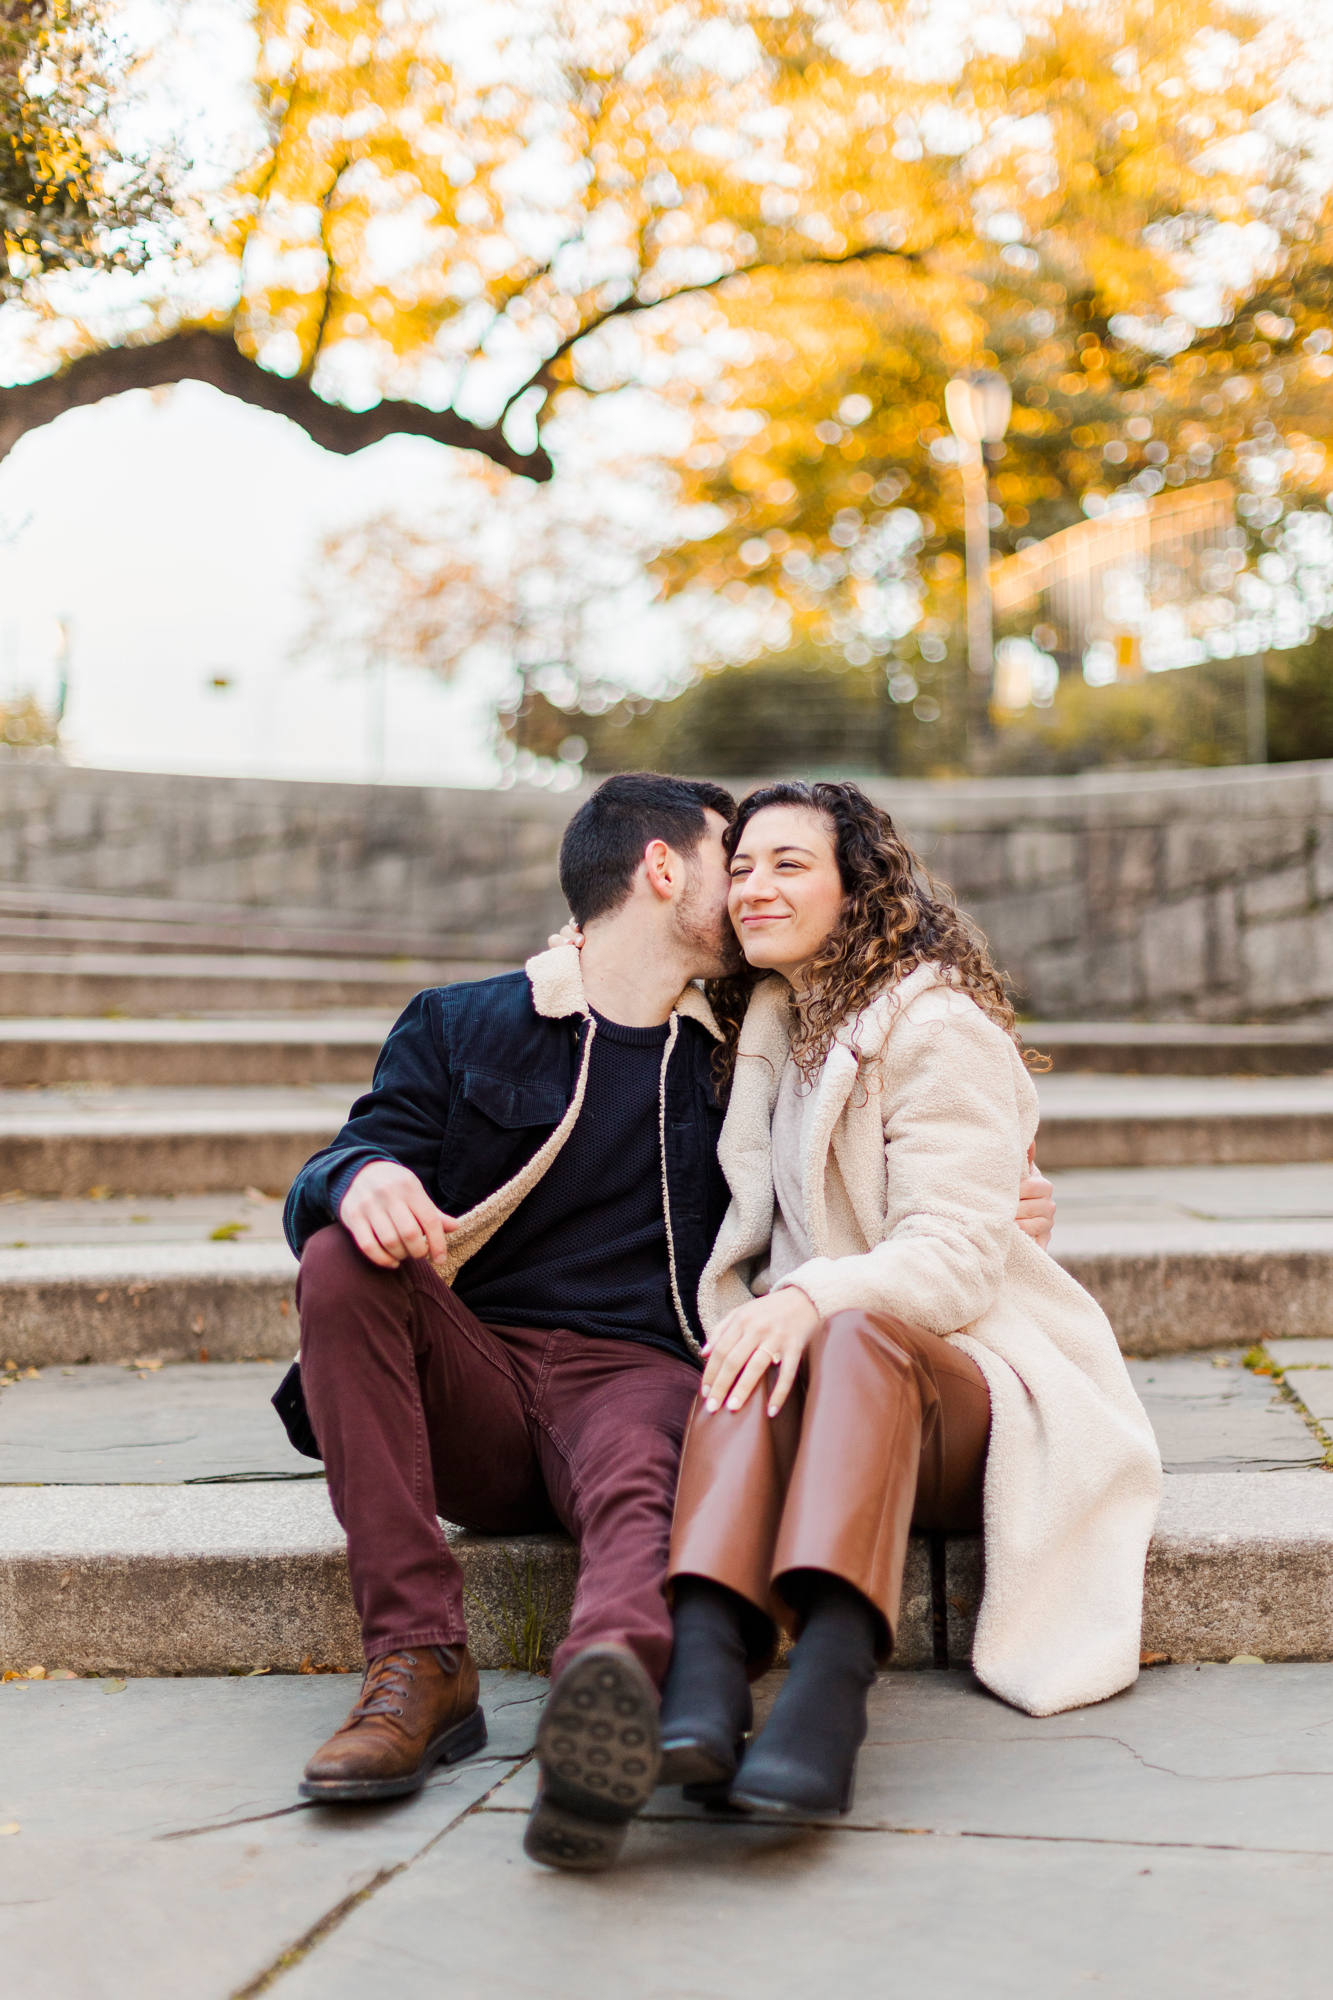 Candid New York engagement photography